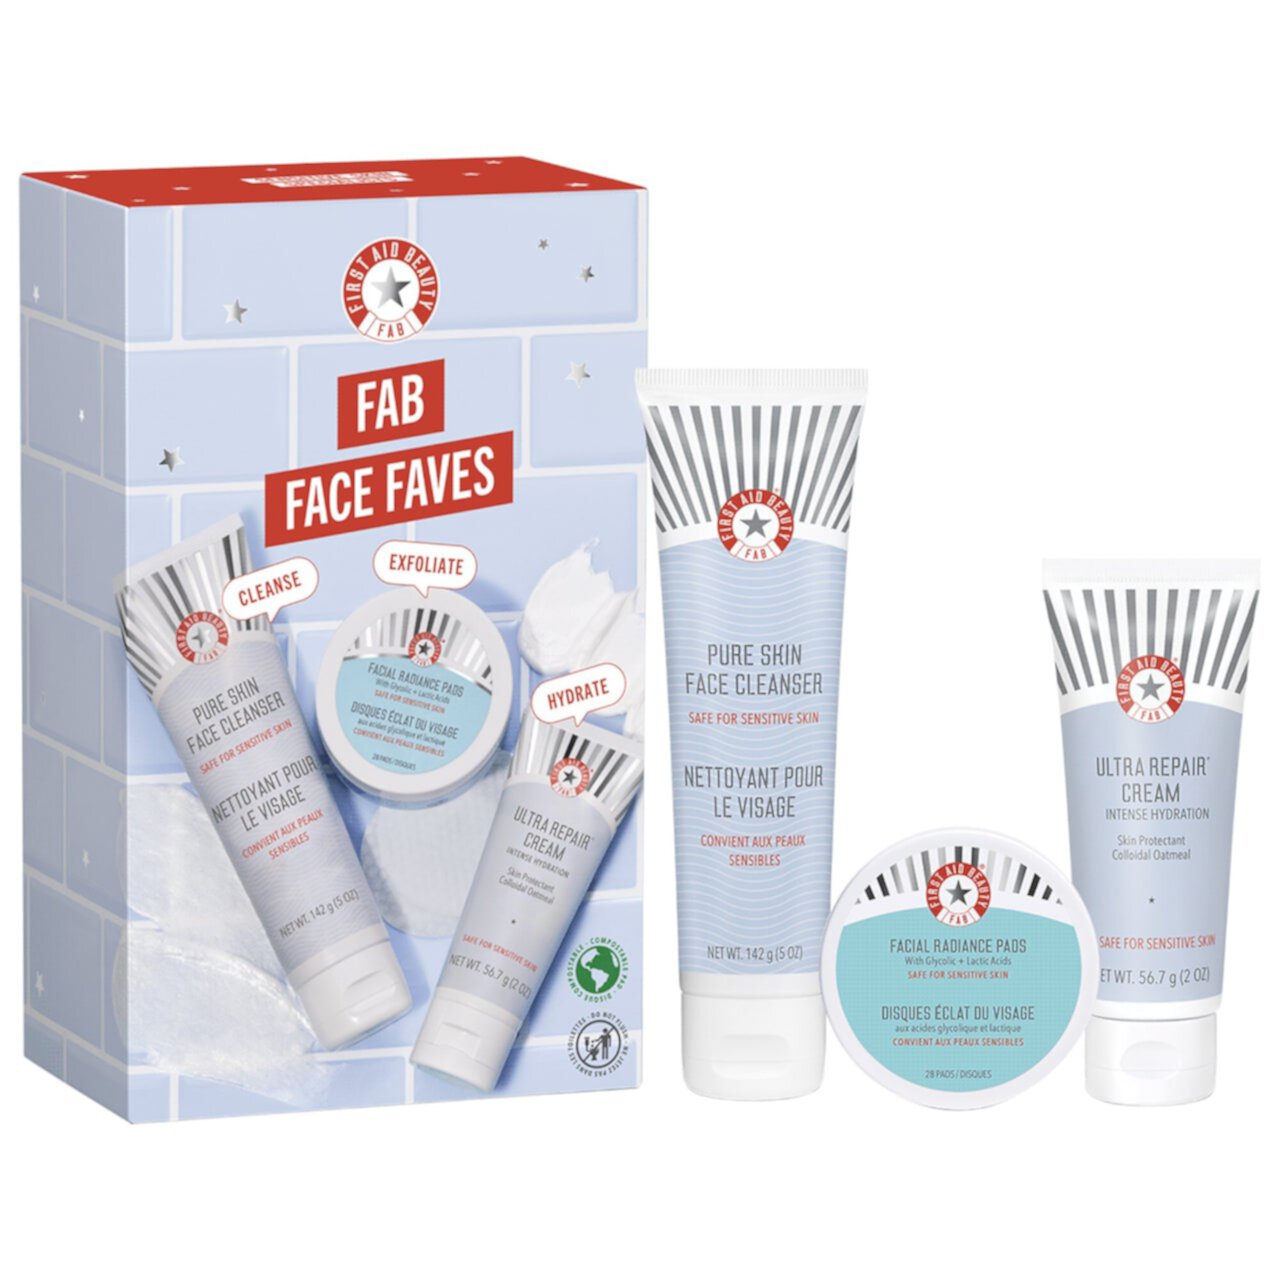 FAB Face Faves Kit – Cleanse, Exfoliate + Hydrate First Aid Beauty